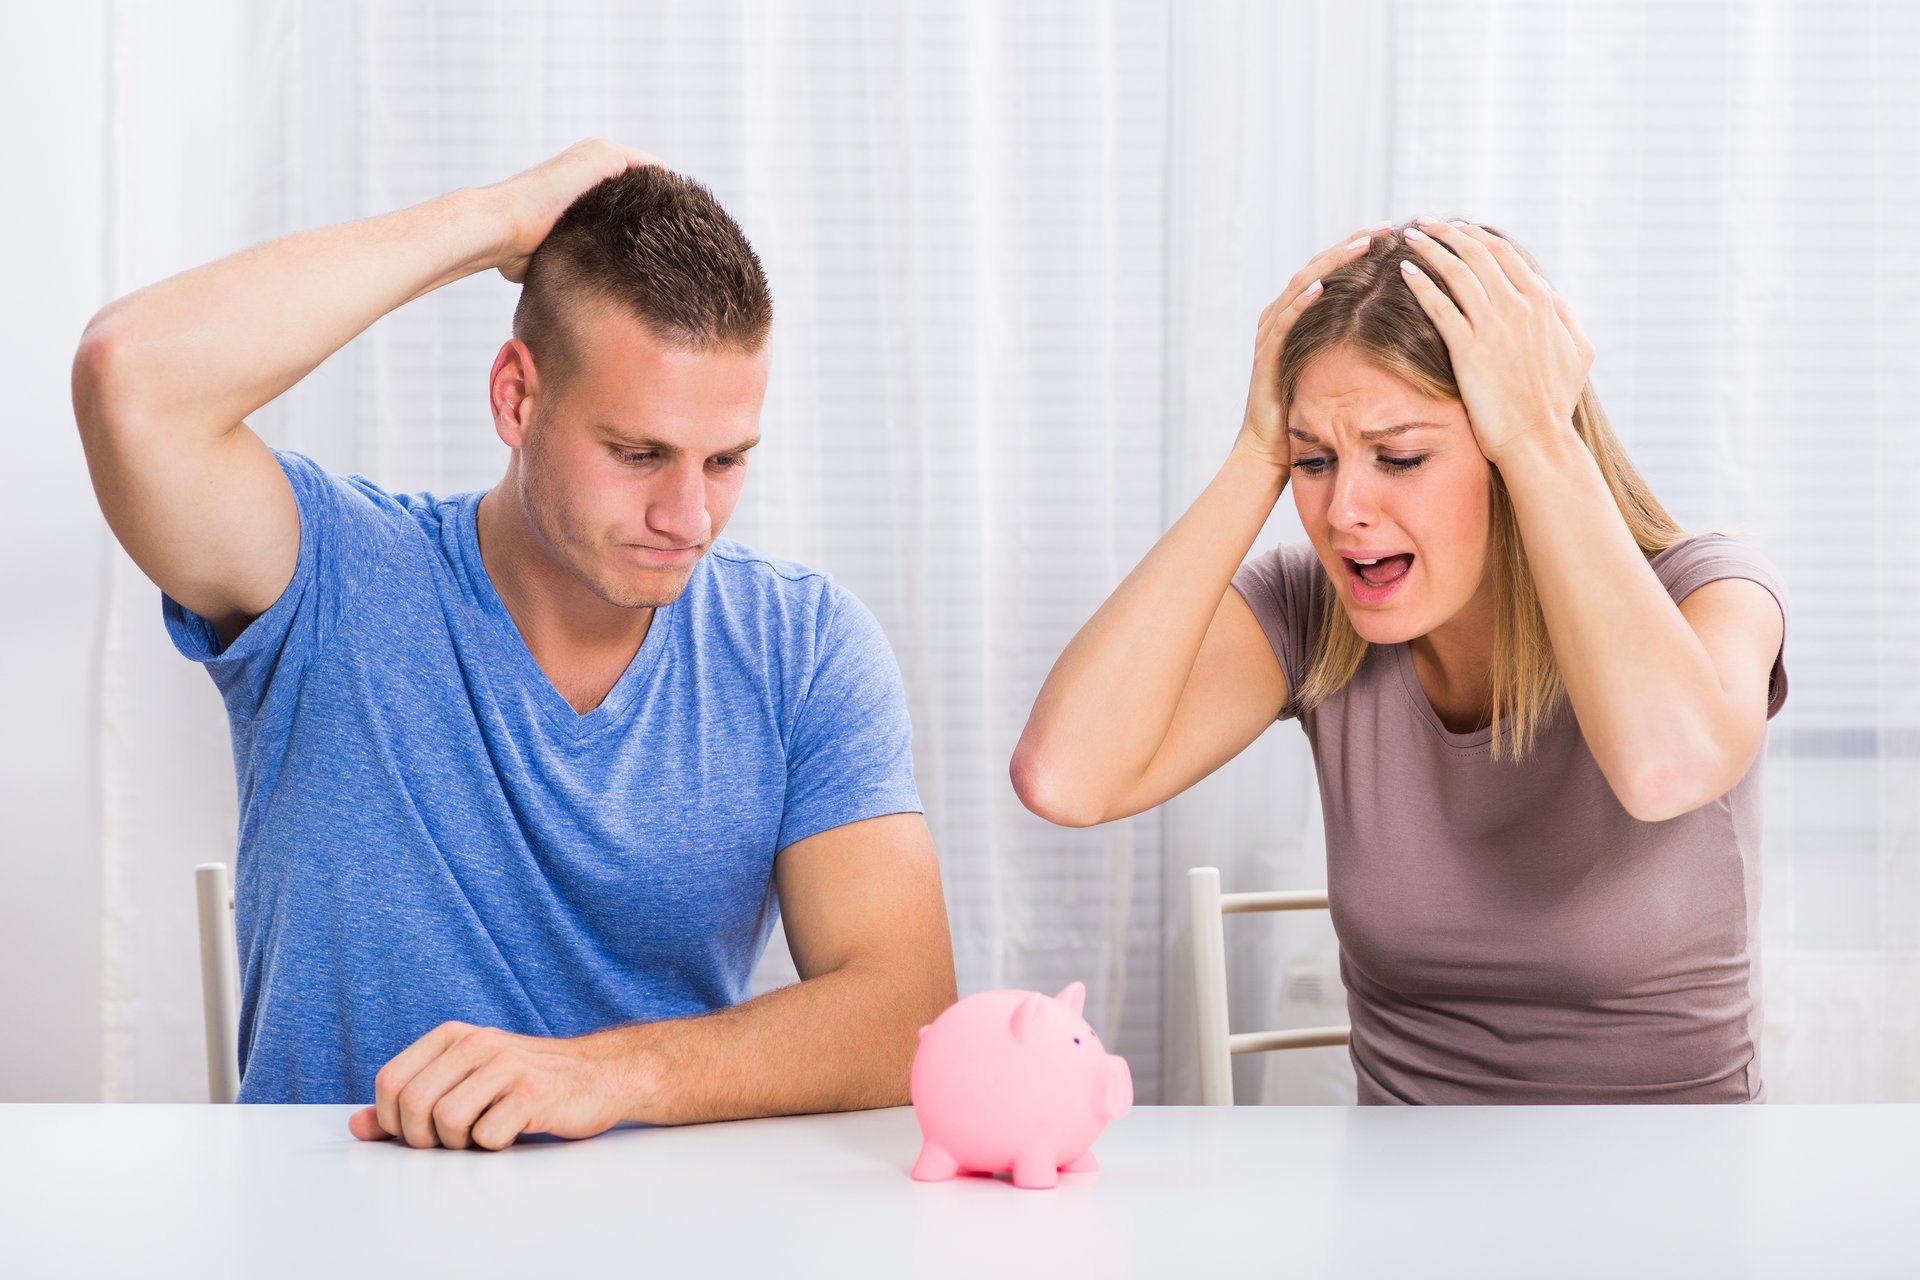 Couple tearing their hair, looking at a piggy bank.